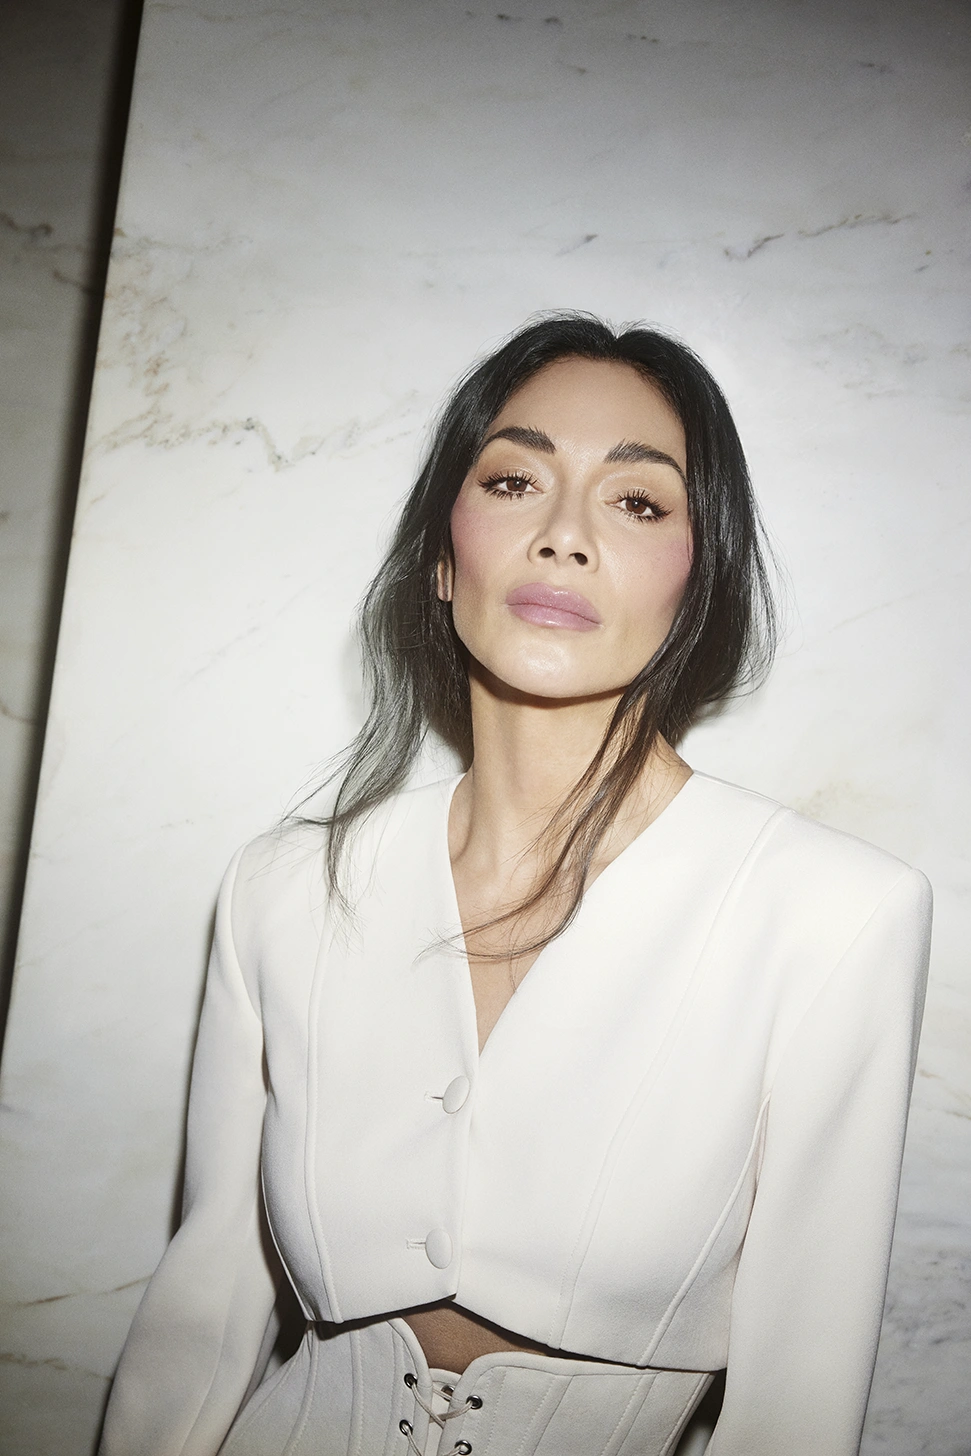 Nicole Scherzinger Inteview: On Theatre, Fame And London